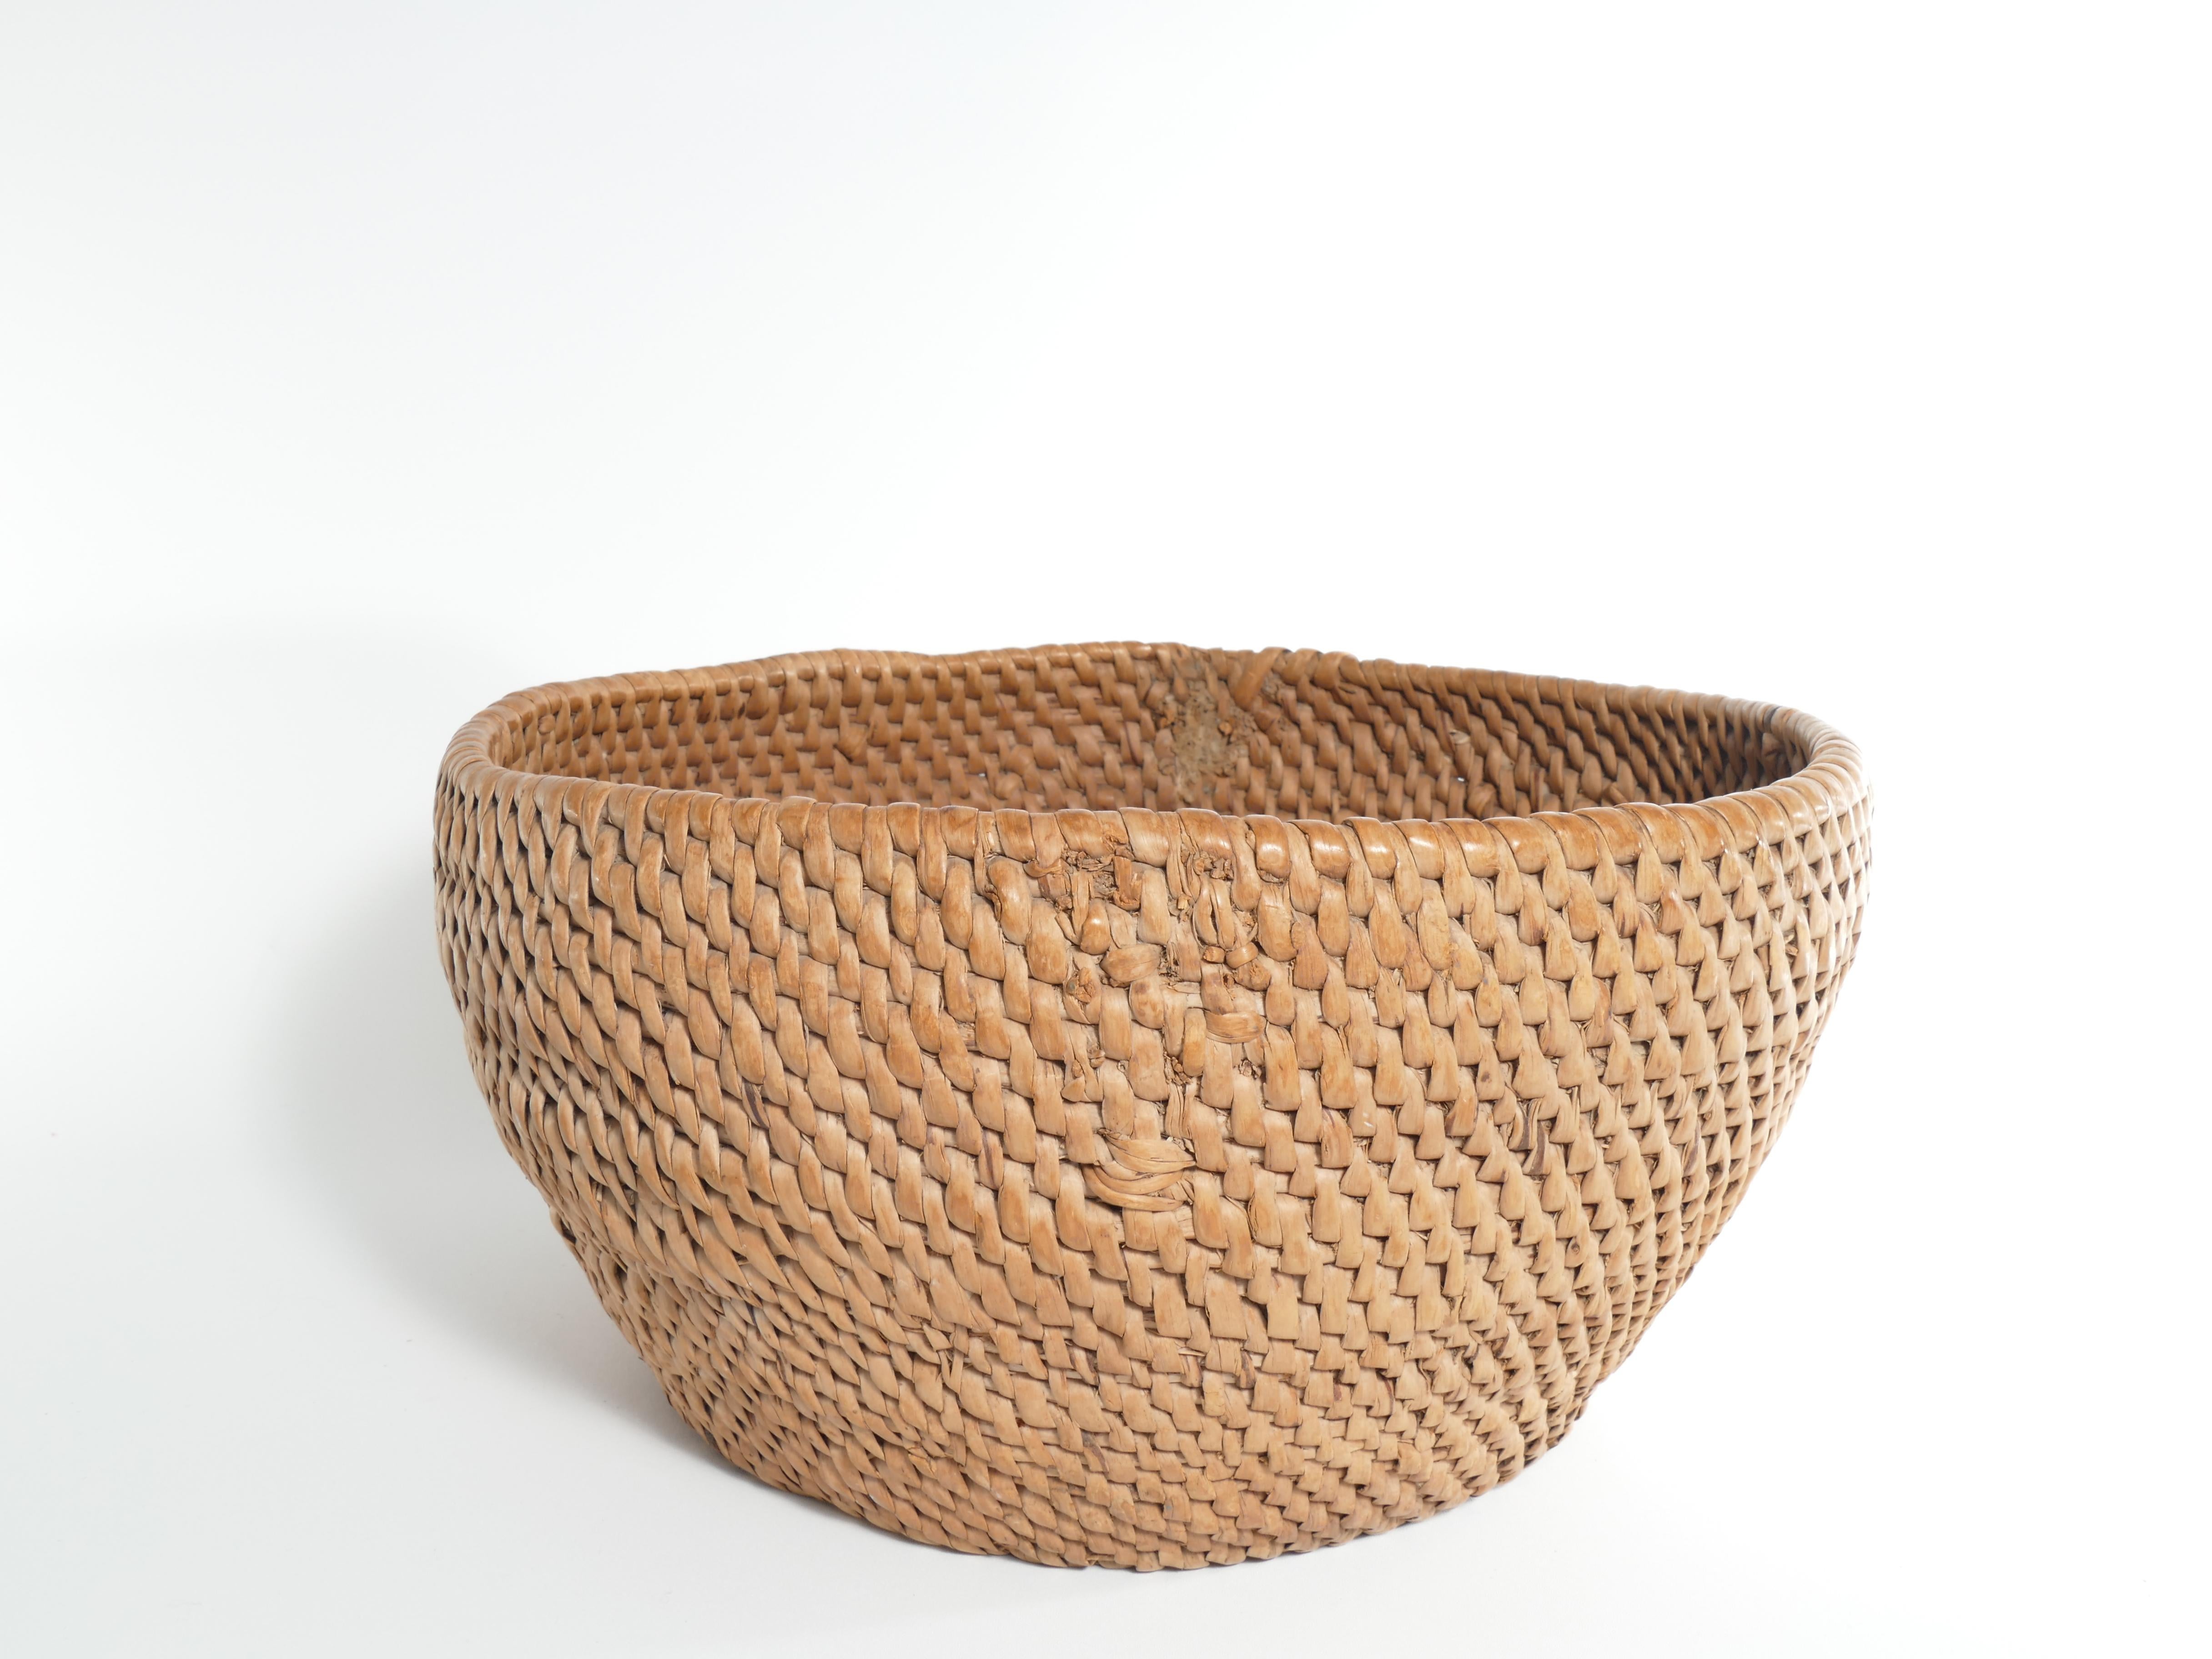 Introducing a remarkable piece of history that transcends time - the exquisite Swedish 19th century root basket. Most likely made of birch root. Immerse yourself in the rich craftsmanship and culture of a bygone era as you lay your eyes upon this